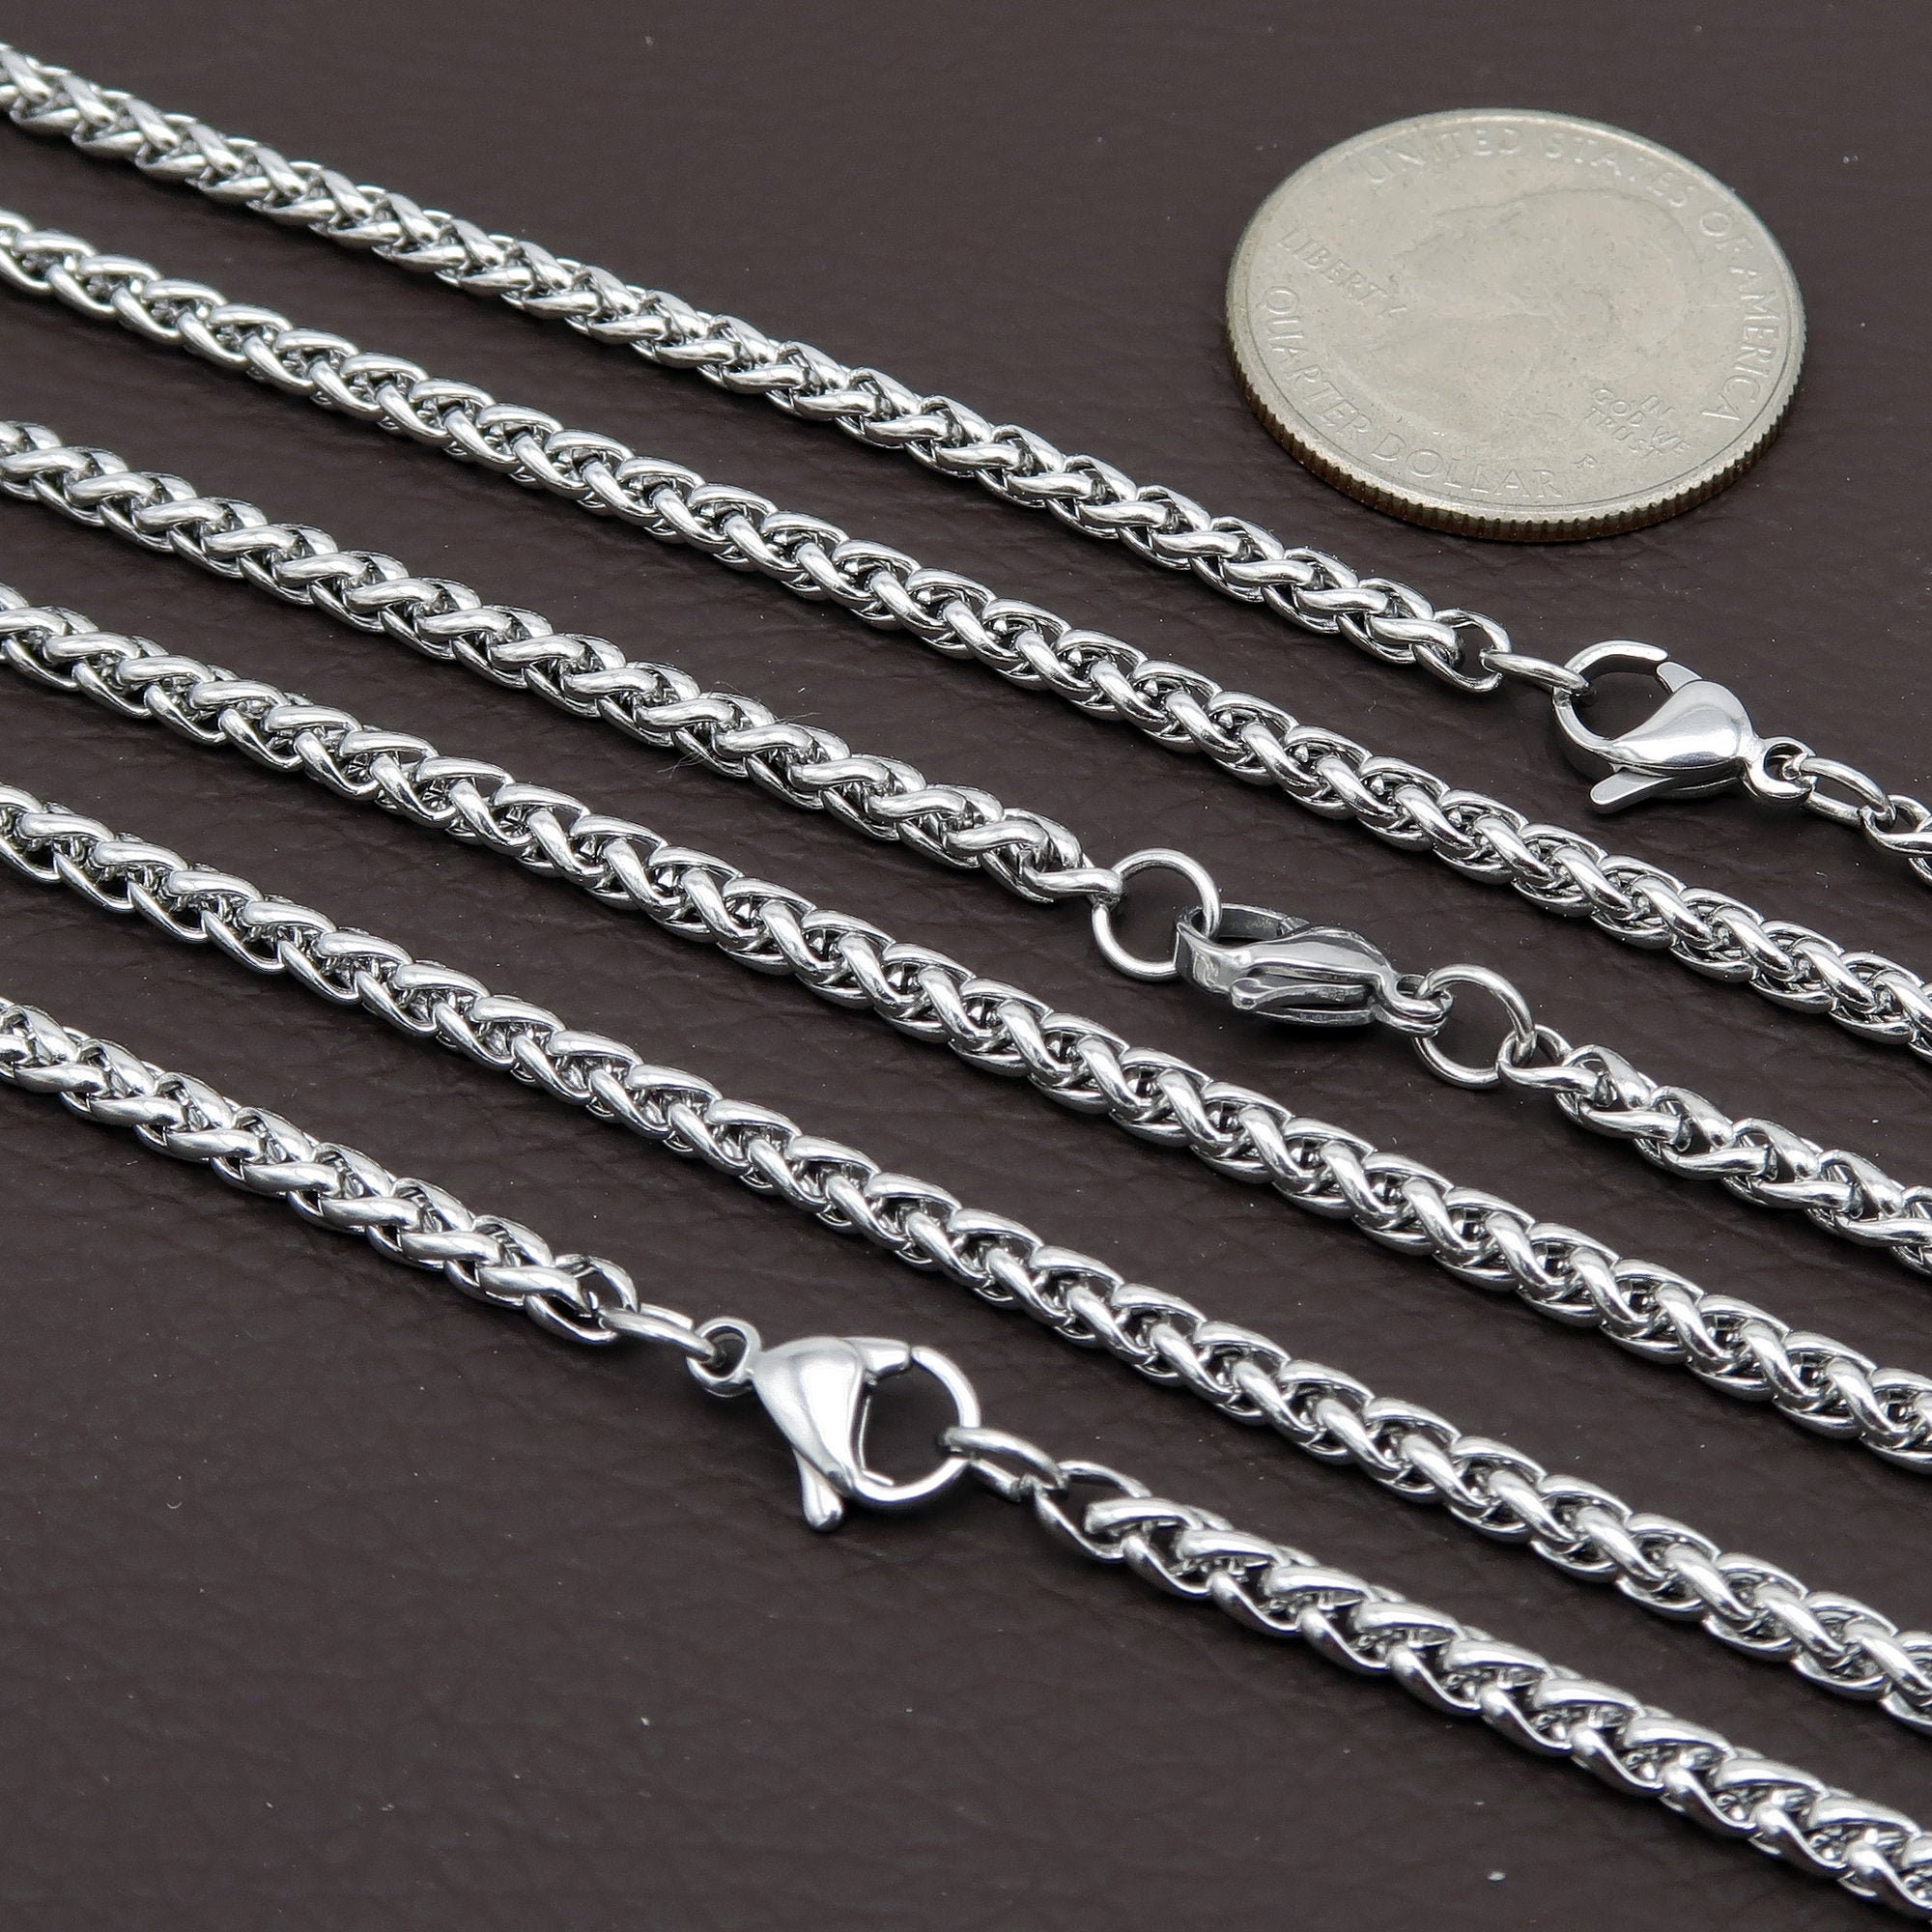 3 Silver aluminum jewelry chains, 3x 25 cm long, Round and flat mesh, DIY jewelry  making, total 75 cm